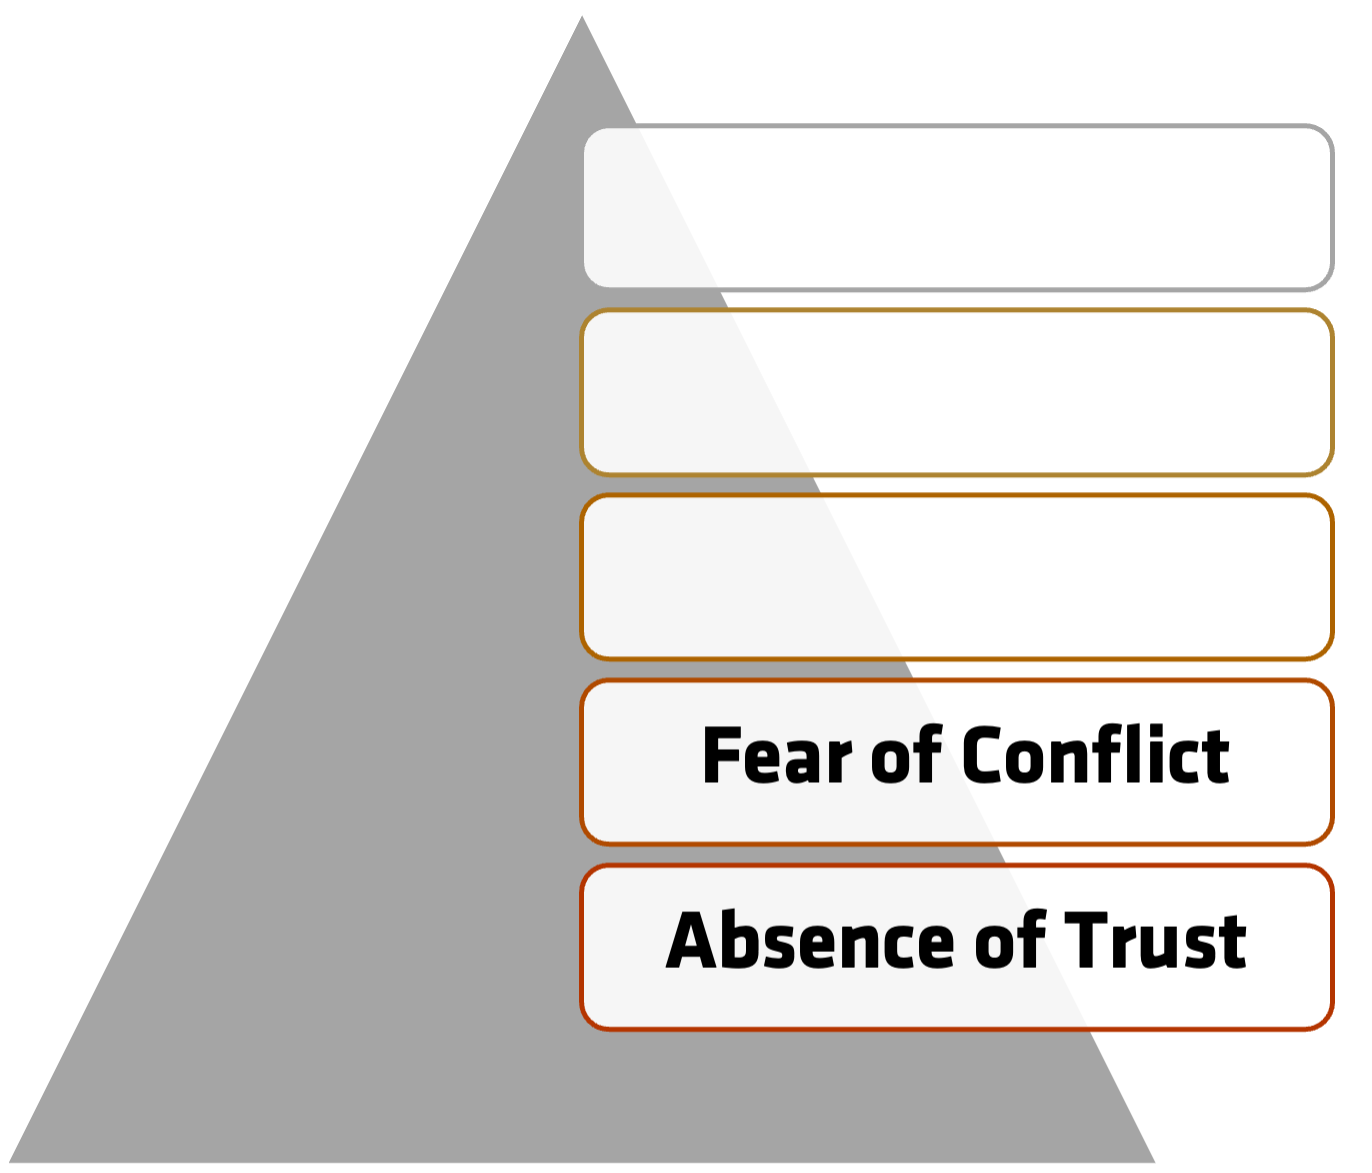 pyramid with two layers, the first layer is absence of trust, the second layer is fear of conflict